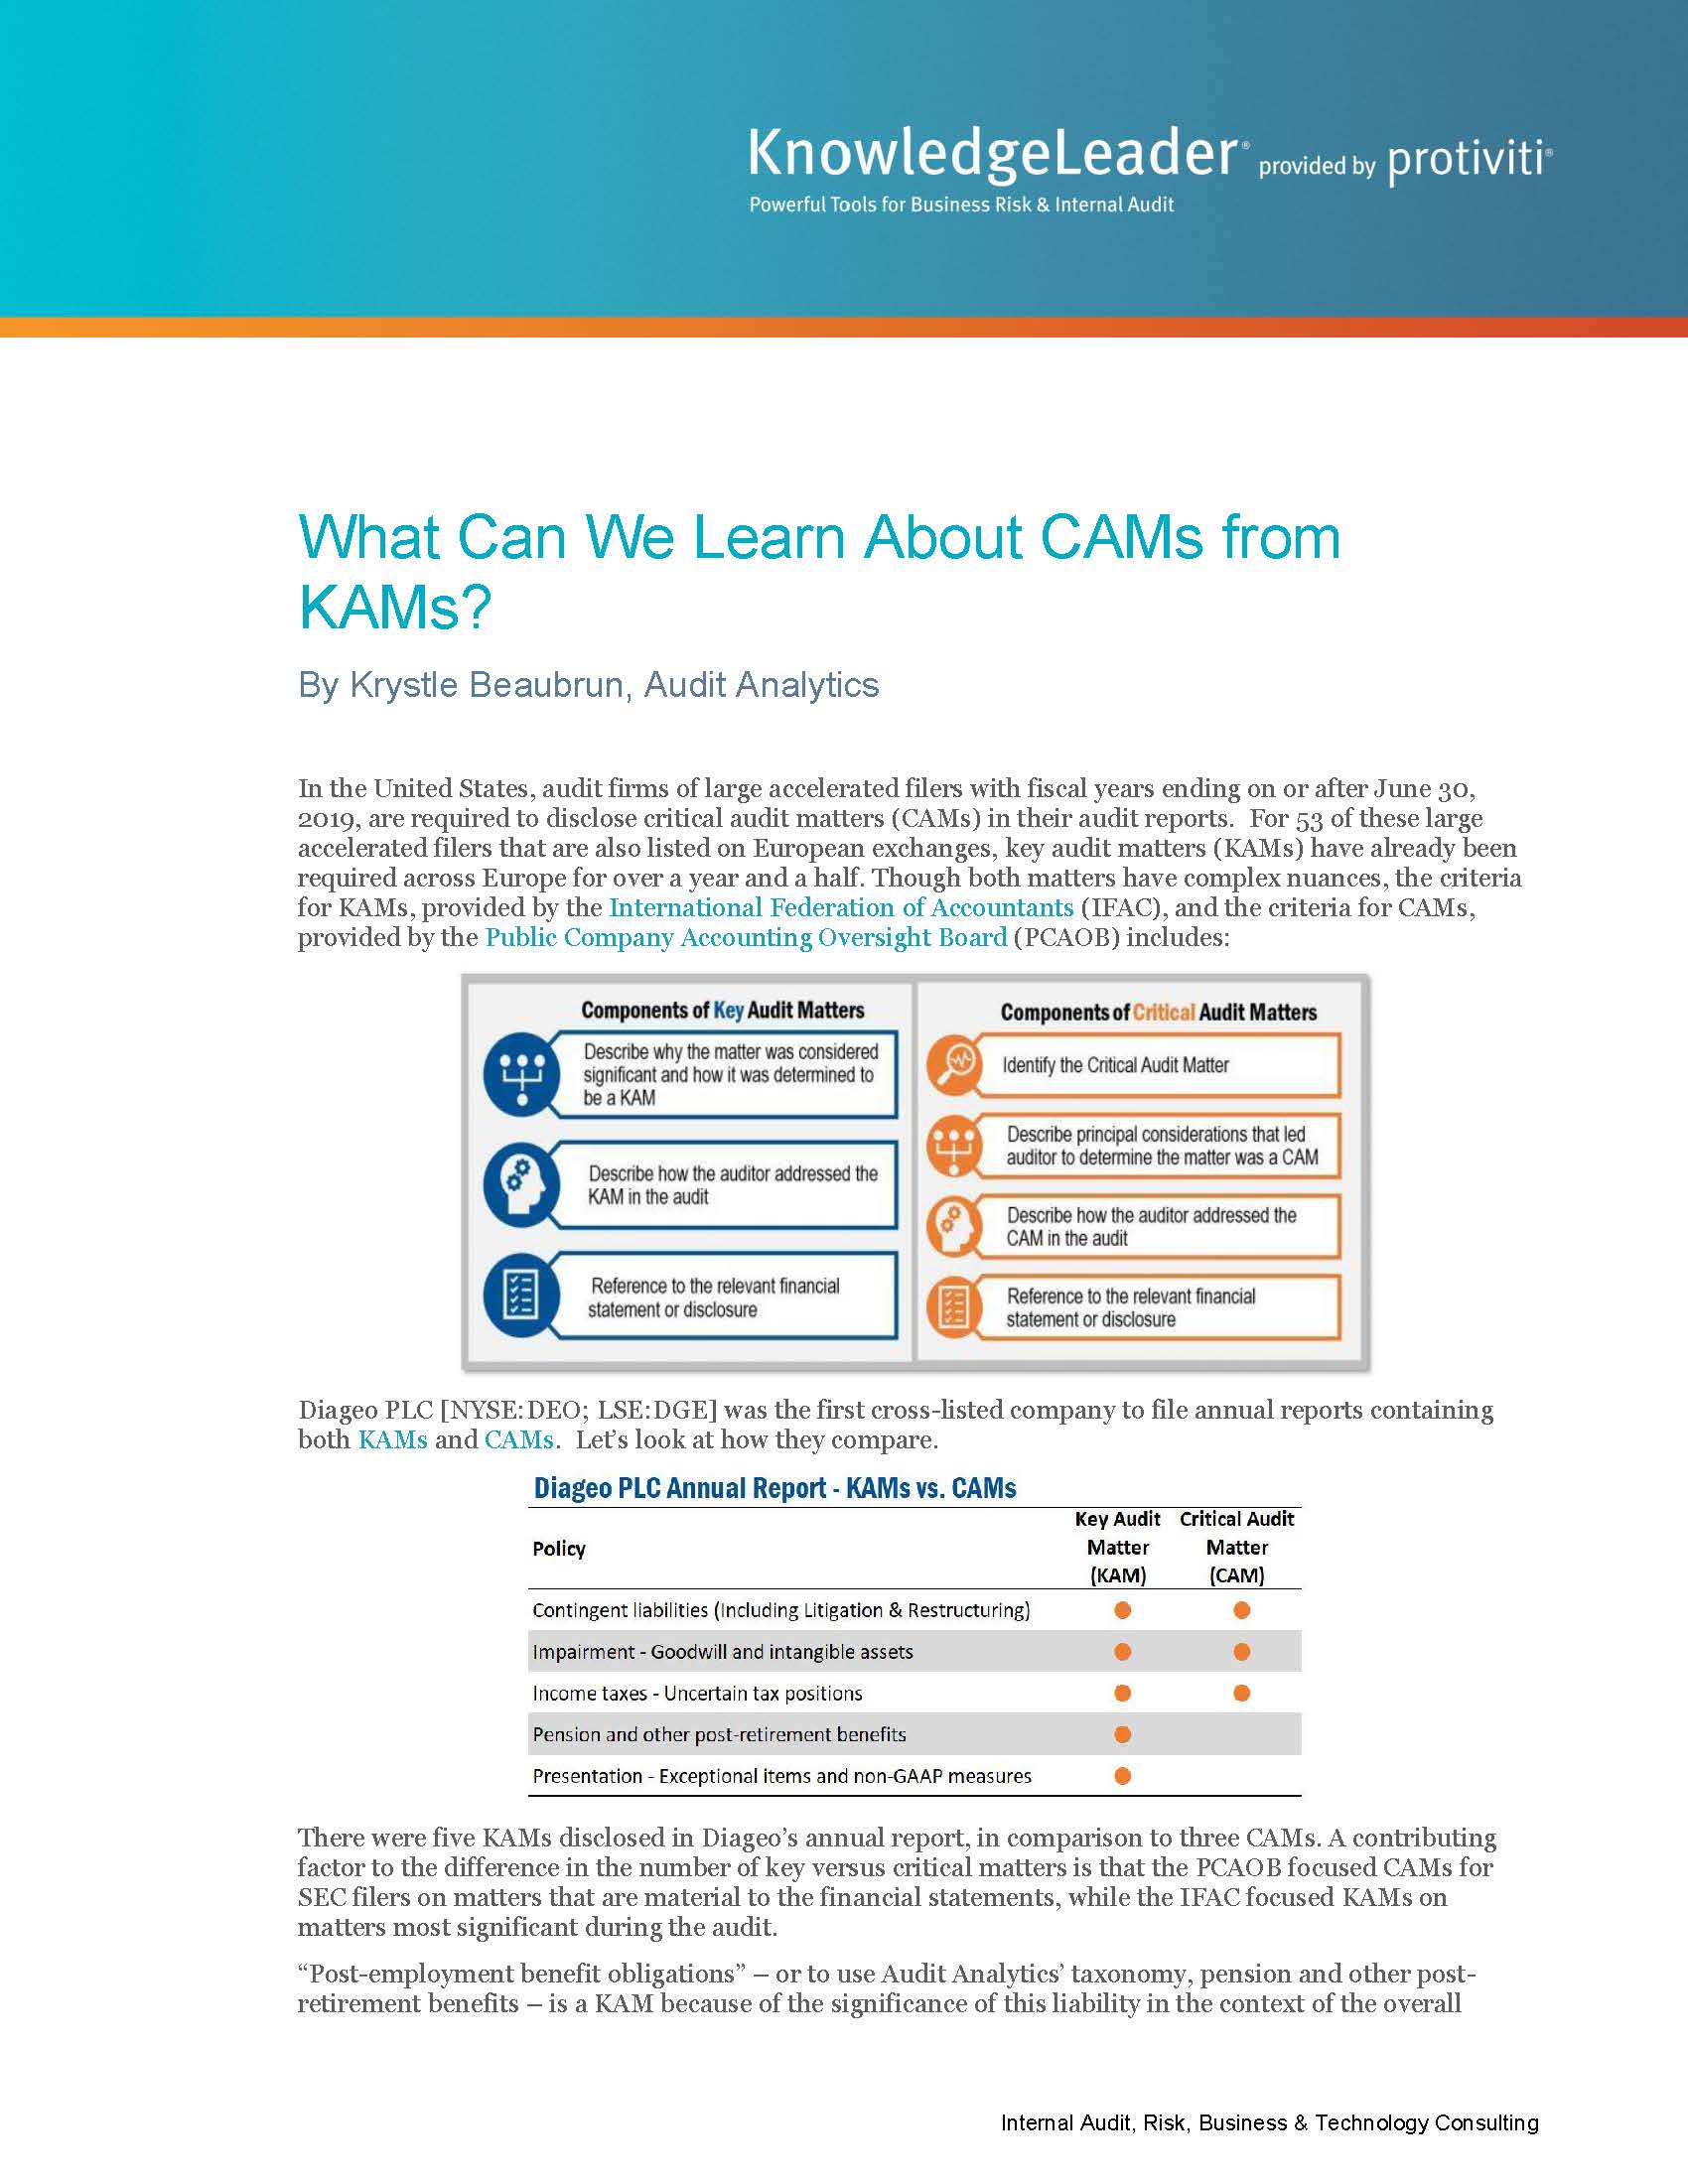 Screenshot of the first page of What Can We Learn About CAMs from KAMs?